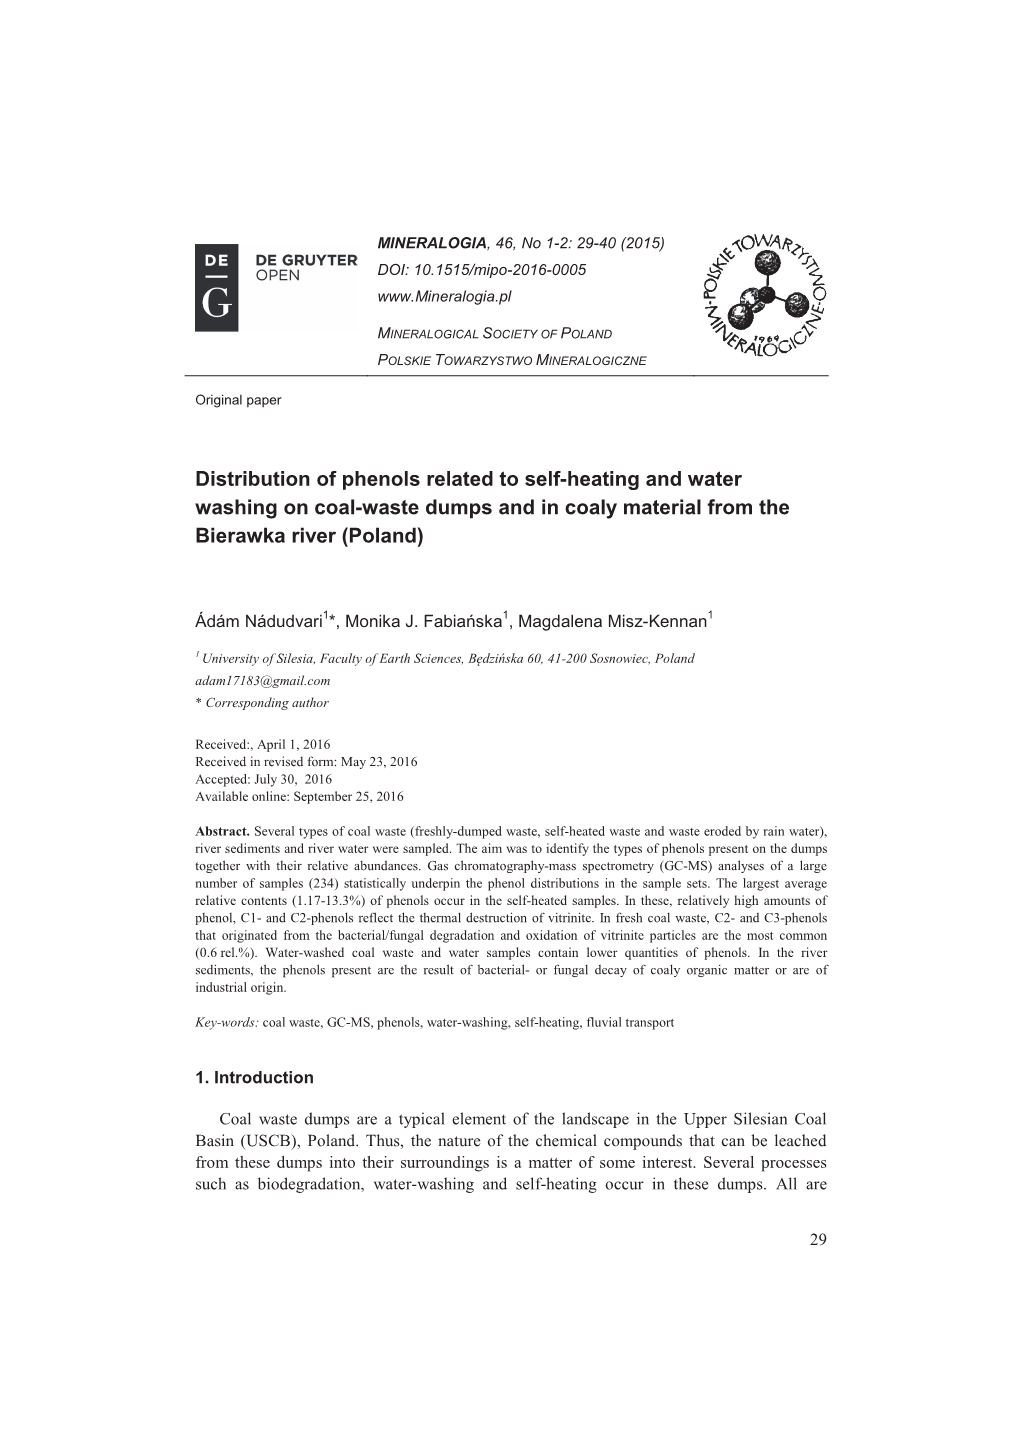 Distribution of Phenols Related to Self-Heating and Water Washing on Coal-Waste Dumps and in Coaly Material from the Bierawka River (Poland)